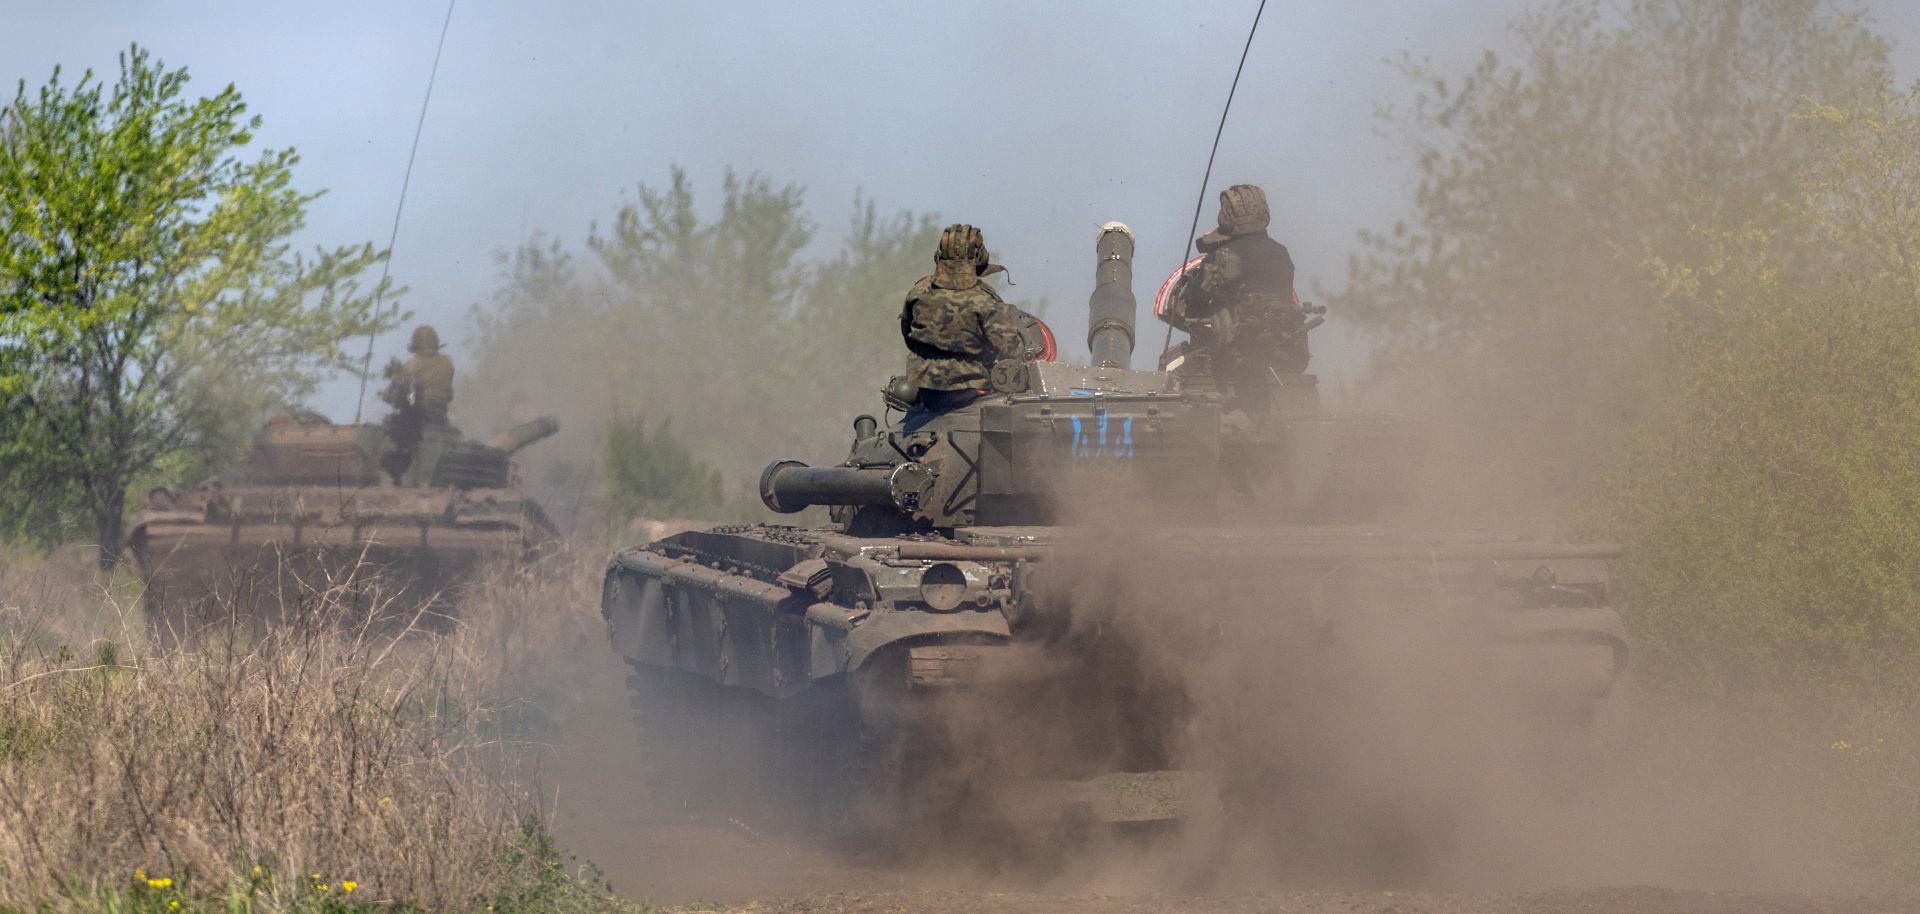 Ukrainian soldiers on tanks participate in a training exercise about 70 kilometers outside of Kherson in southern Ukraine on May 9, 2022. 